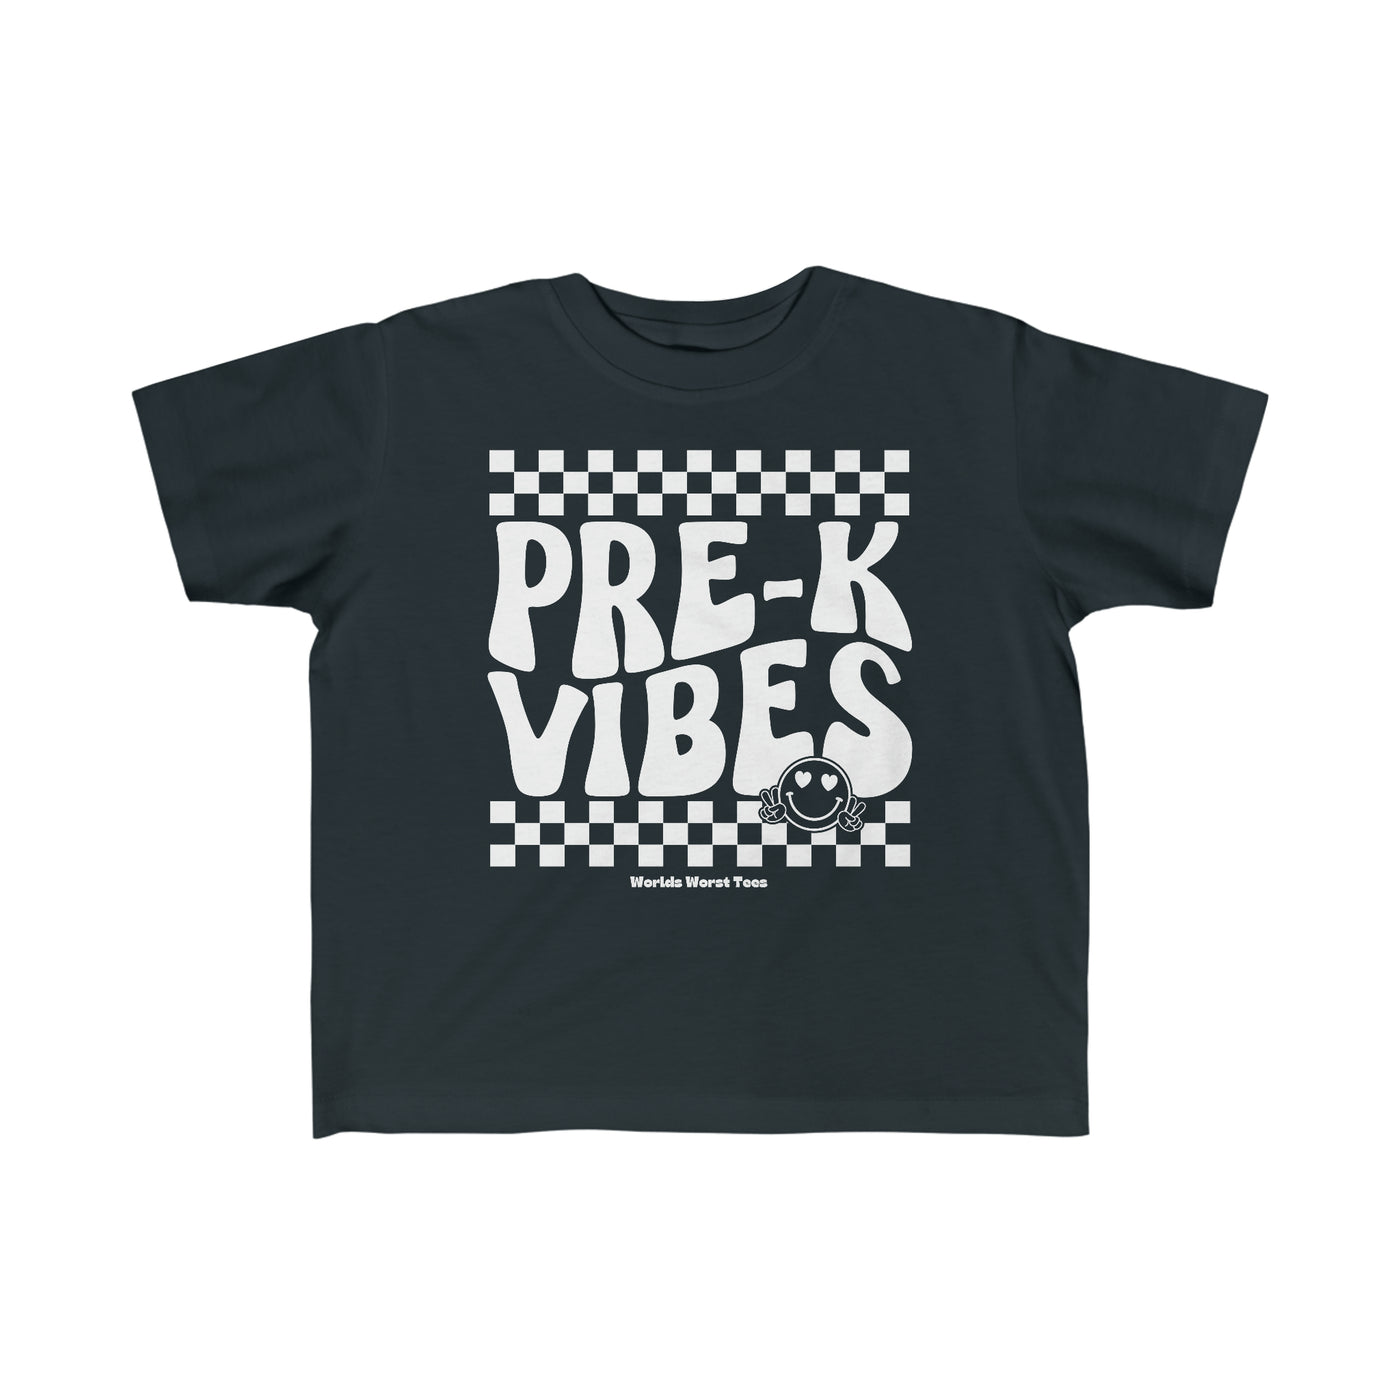 Pre K Vibes Toddler Tee